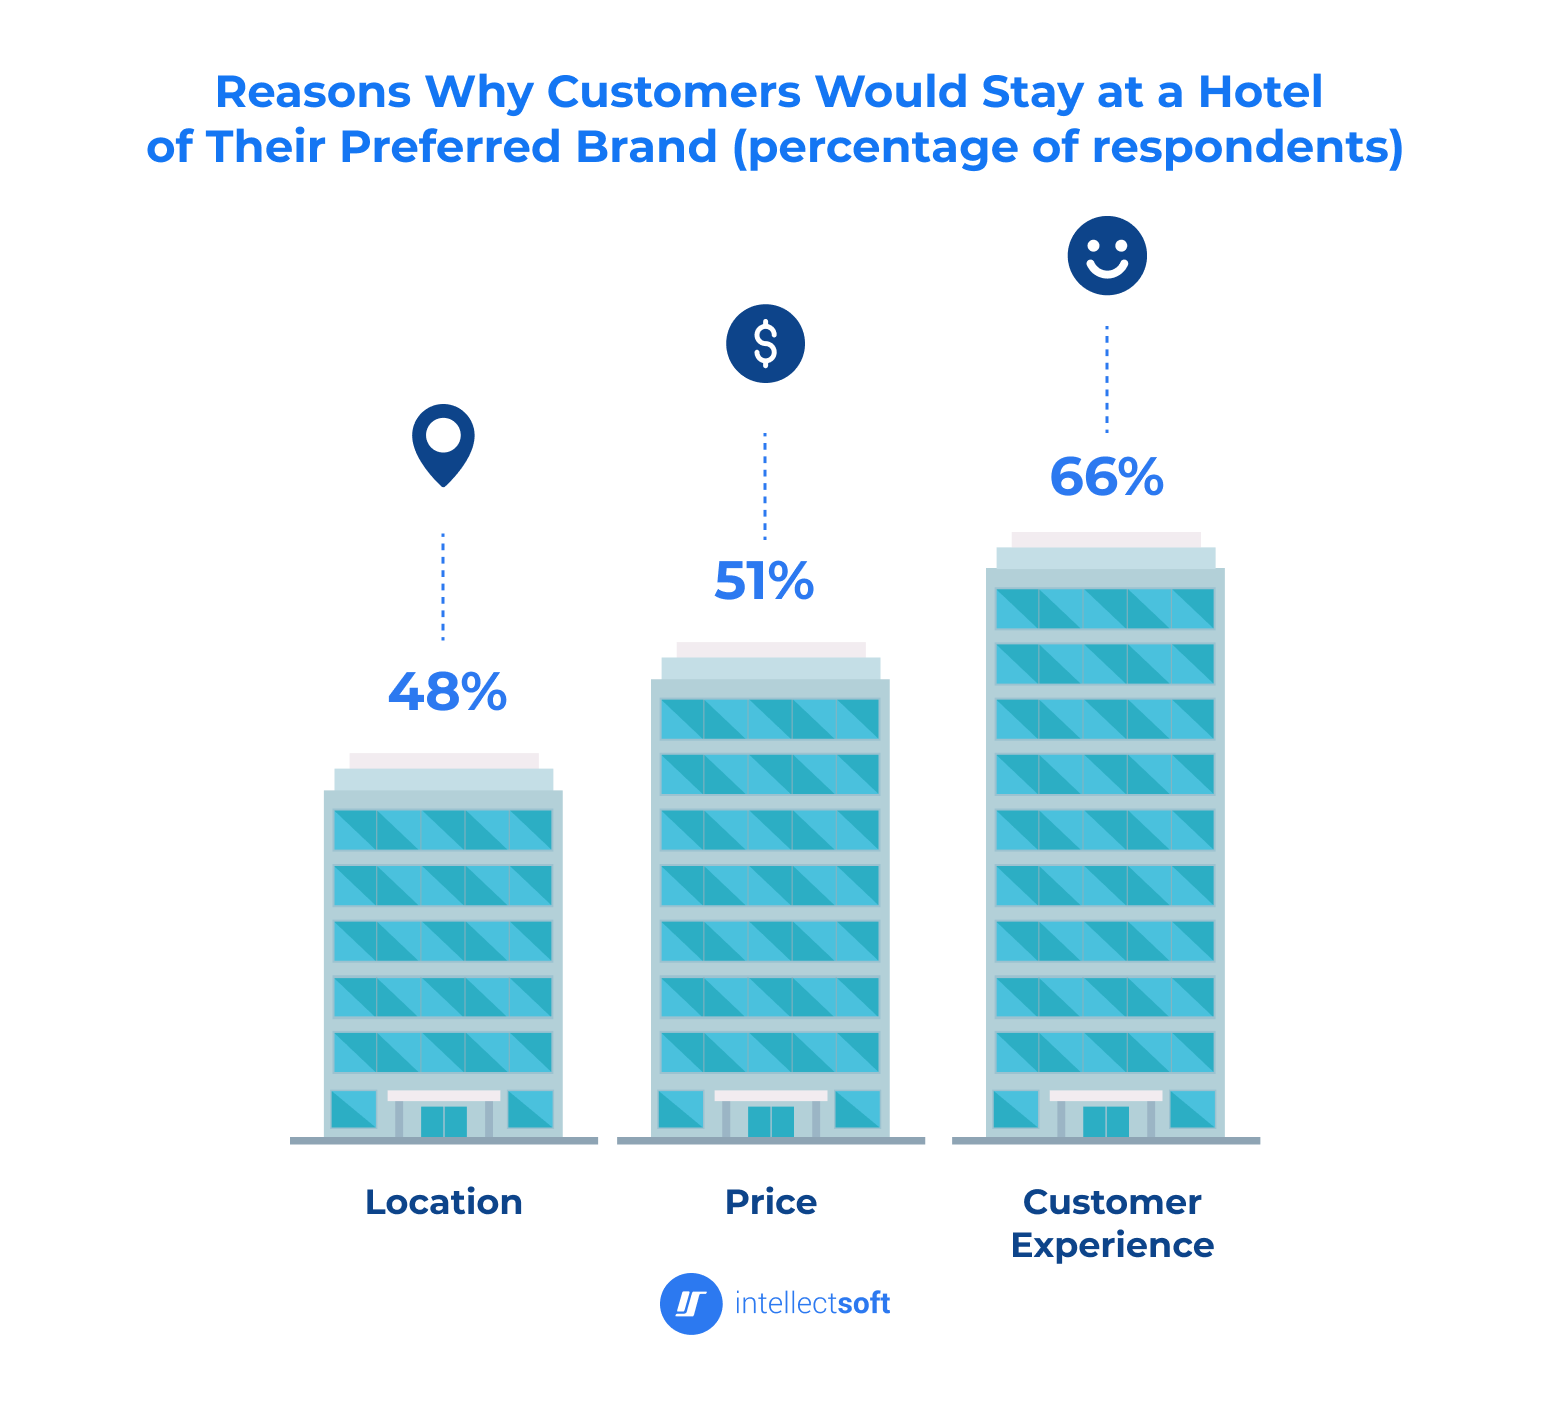 Infographic of reasons for customer loyalty to hotel brands, in percentage